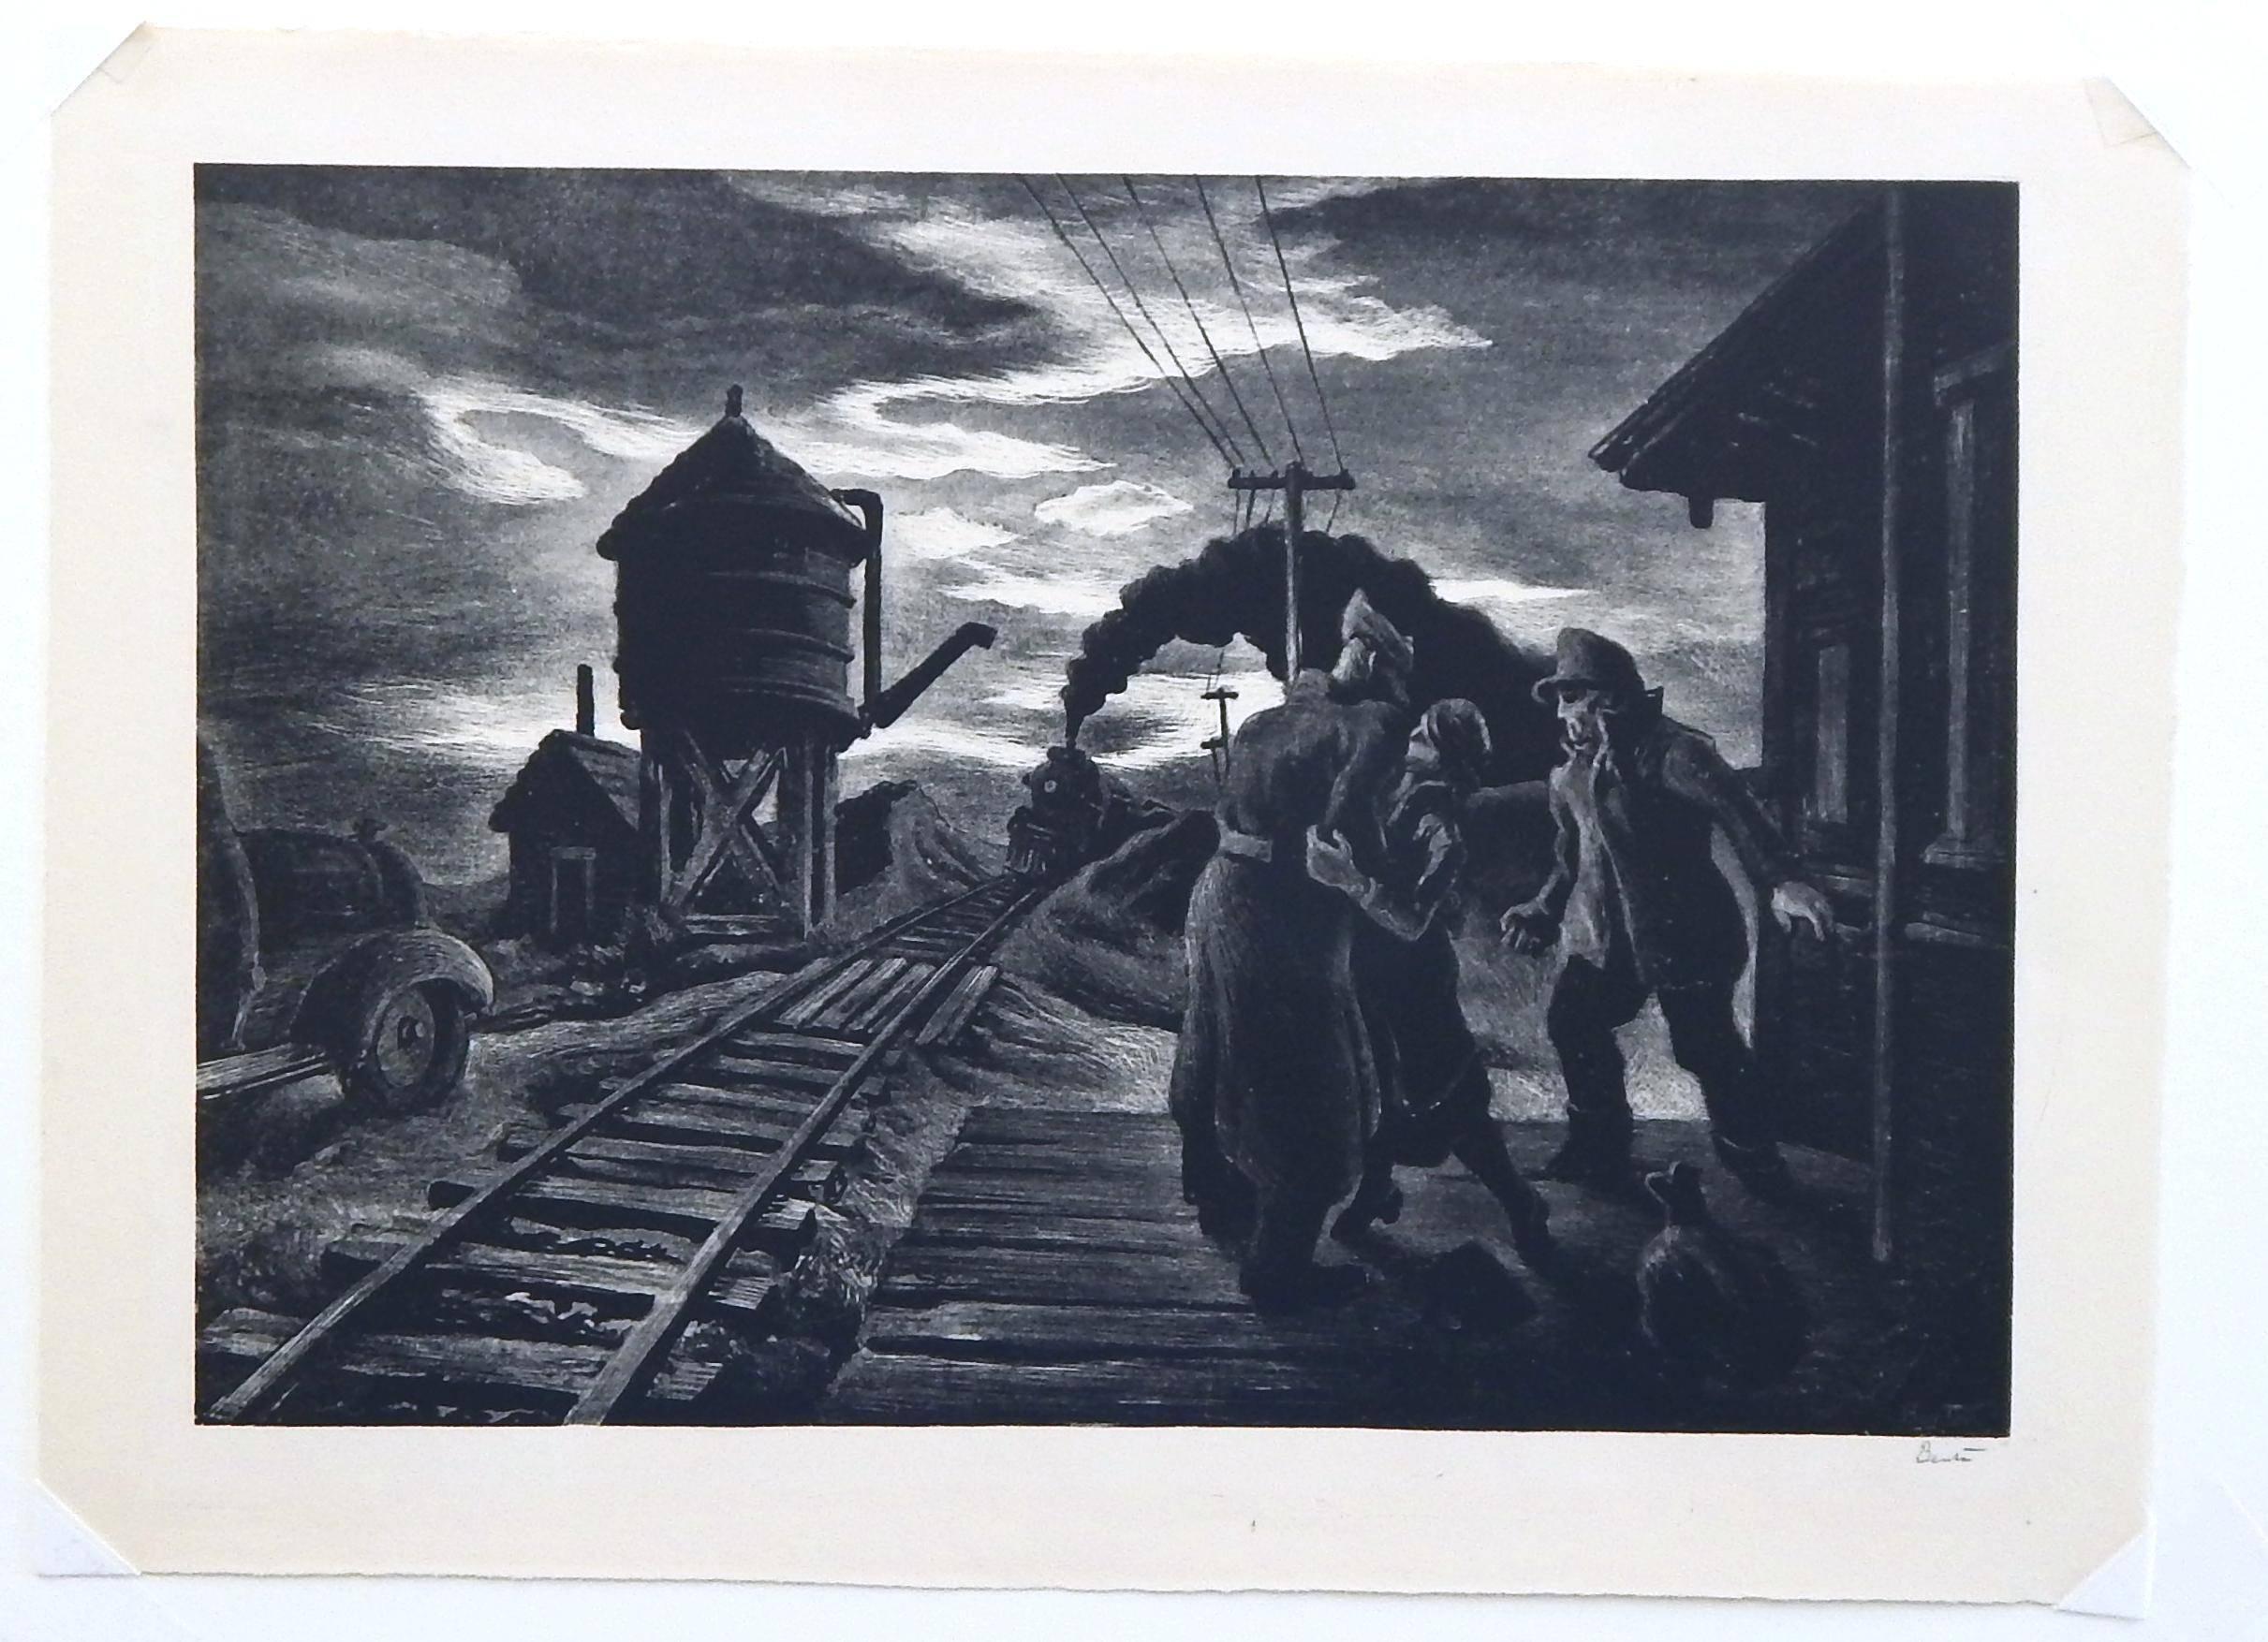 Thomas Hart Benton (American 1889-1975) original stone lithograph
Title: “Morning Train (or Soldier’s Farewell)”
Created 1943. Image measures: 9 3/8